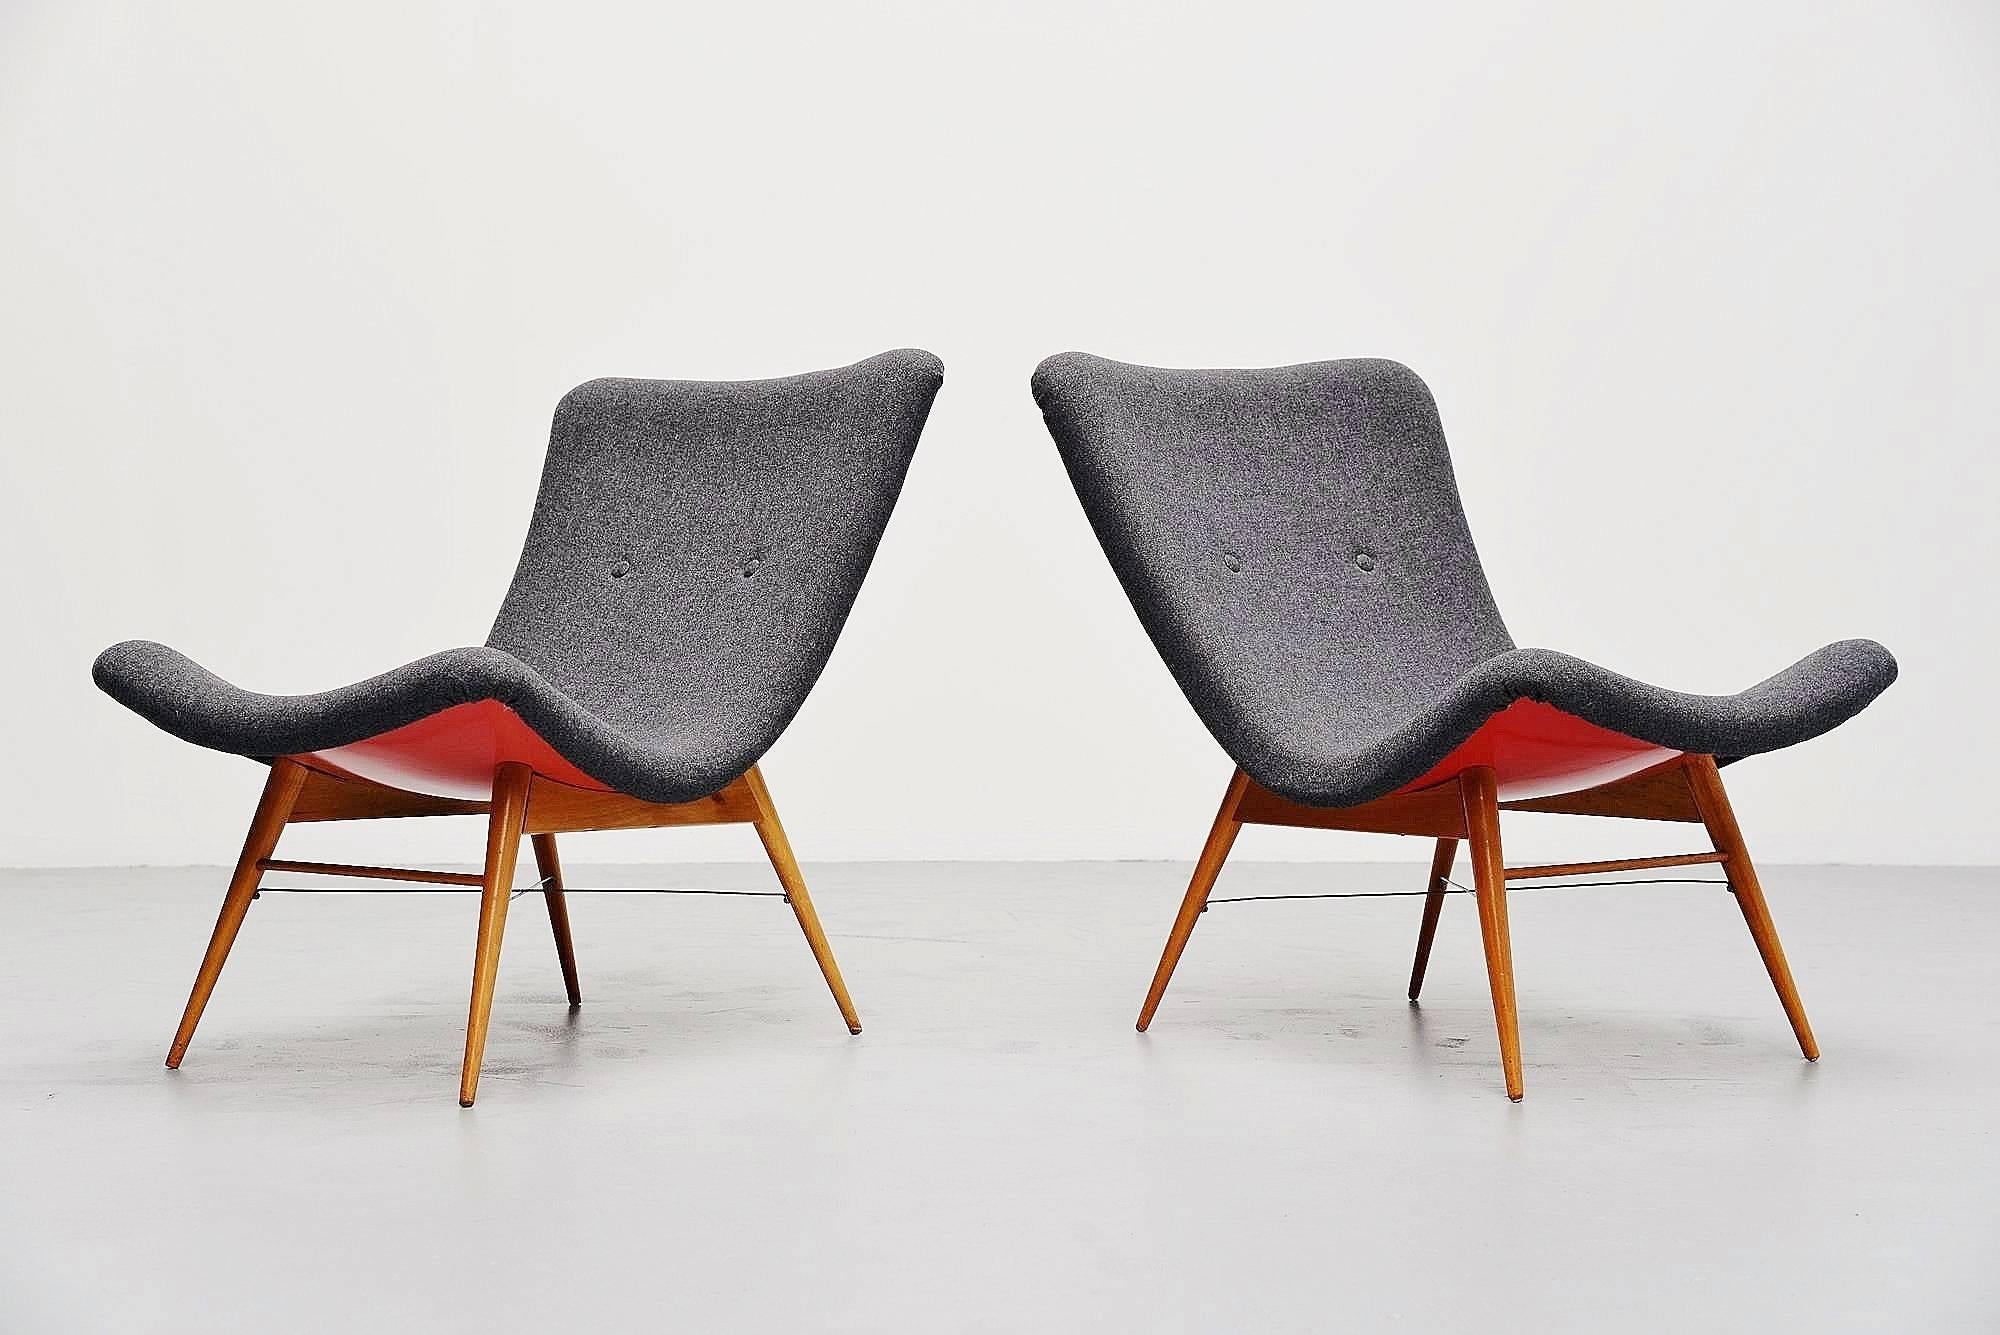 Very nice pair of low lounge chairs designed by Miroslav Navratil, manufactured by Cesky Nabytek, Czech Republic 1959. These chairs are very unusual with birch wooden legs, stabilized with the metal cross connection in between. The shell is made of